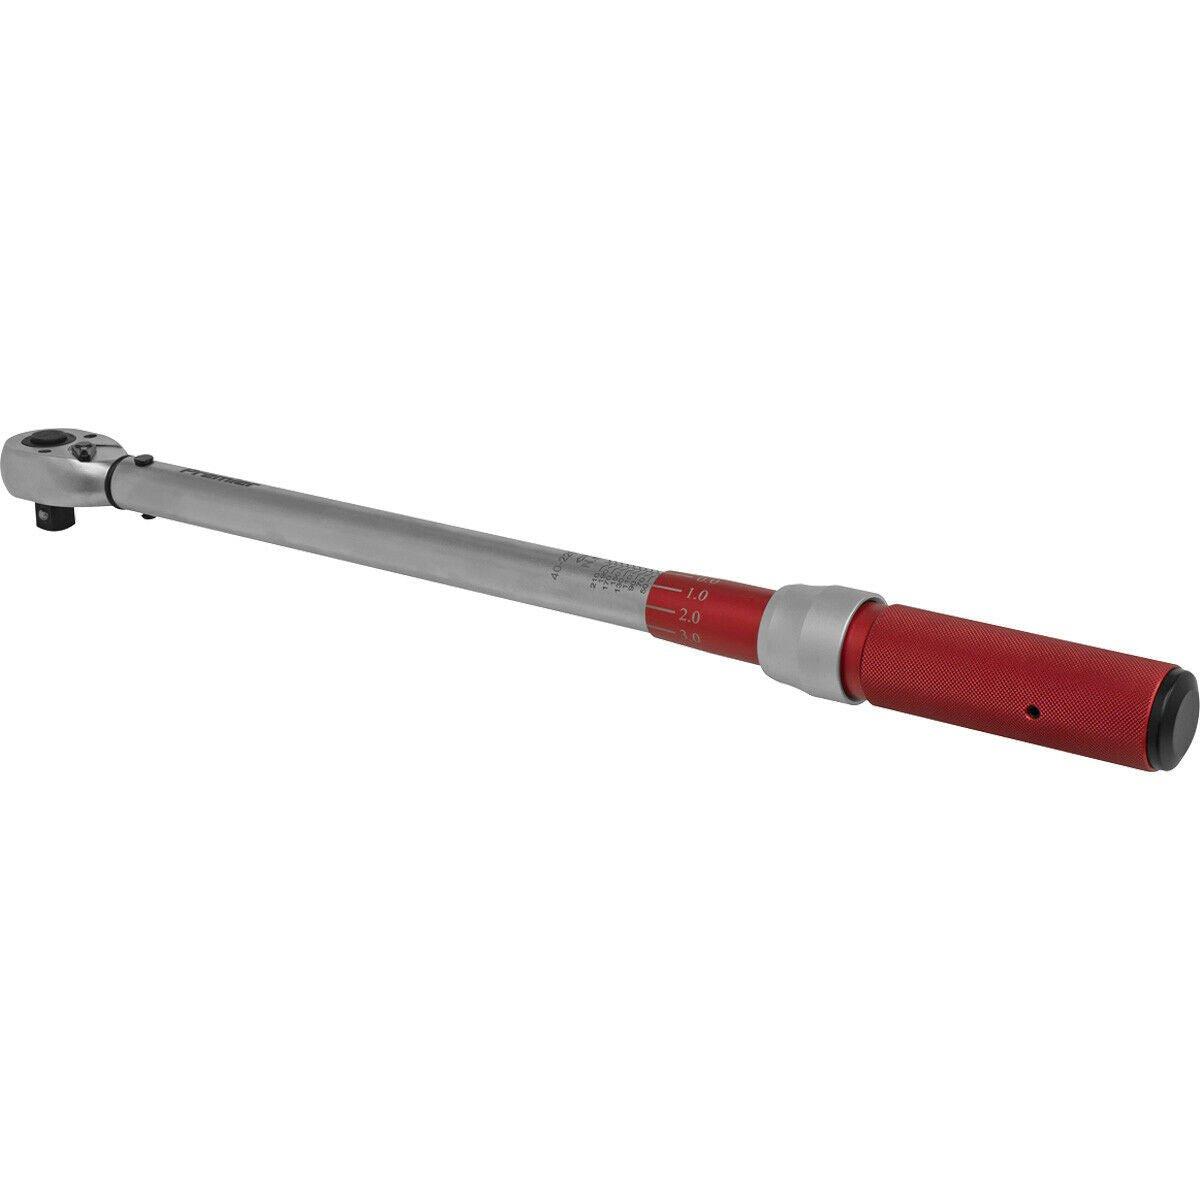 Micrometer Style Torque Wrench - 1/2